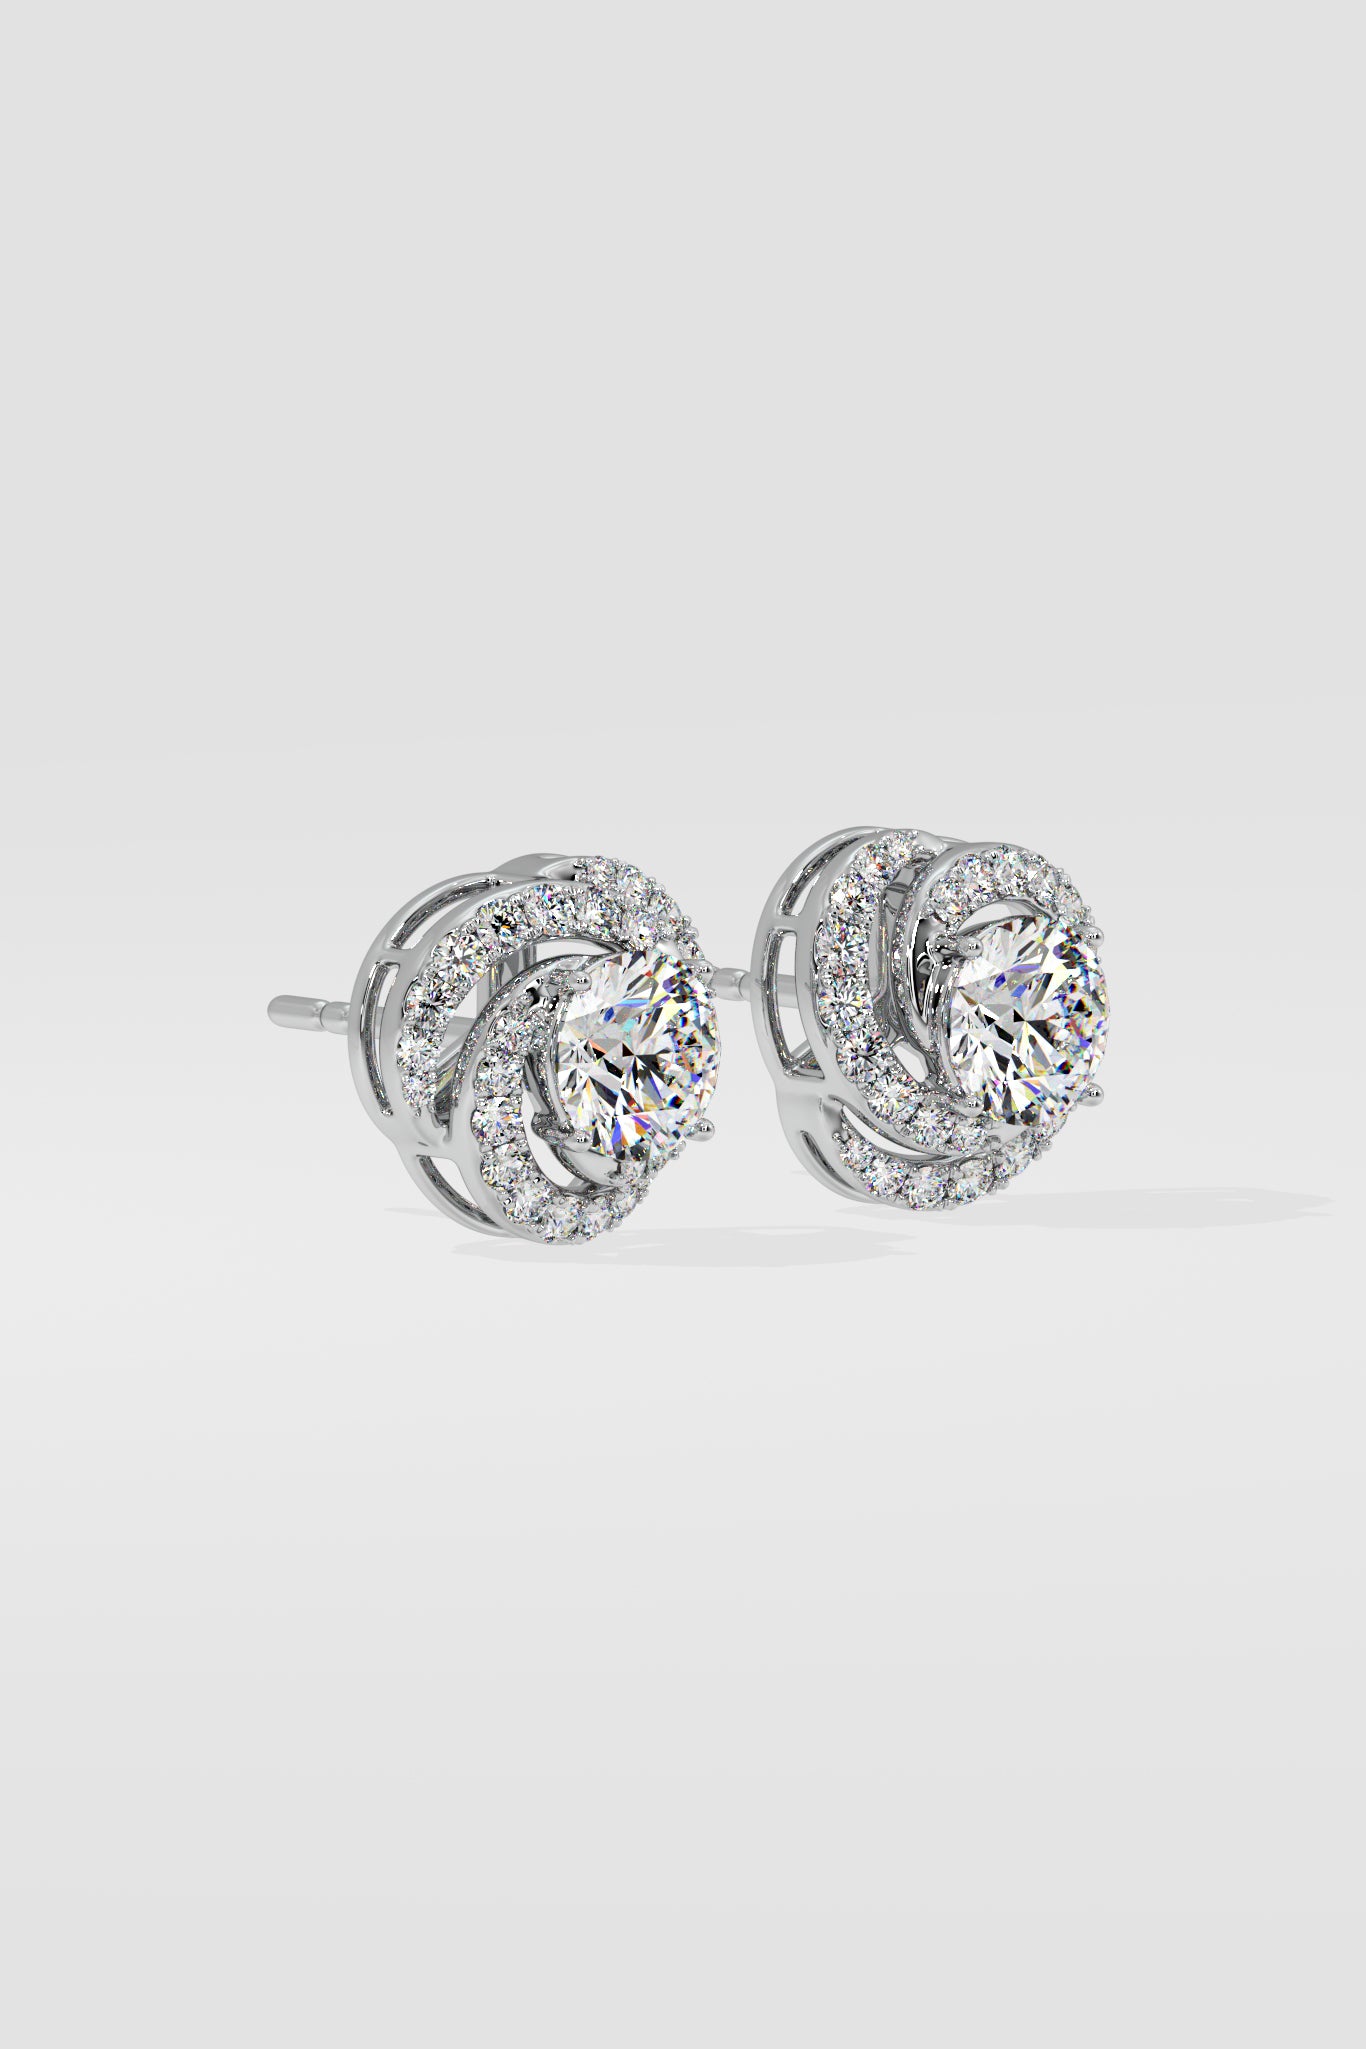 2 ct Solitaire Swirl Halo Earring